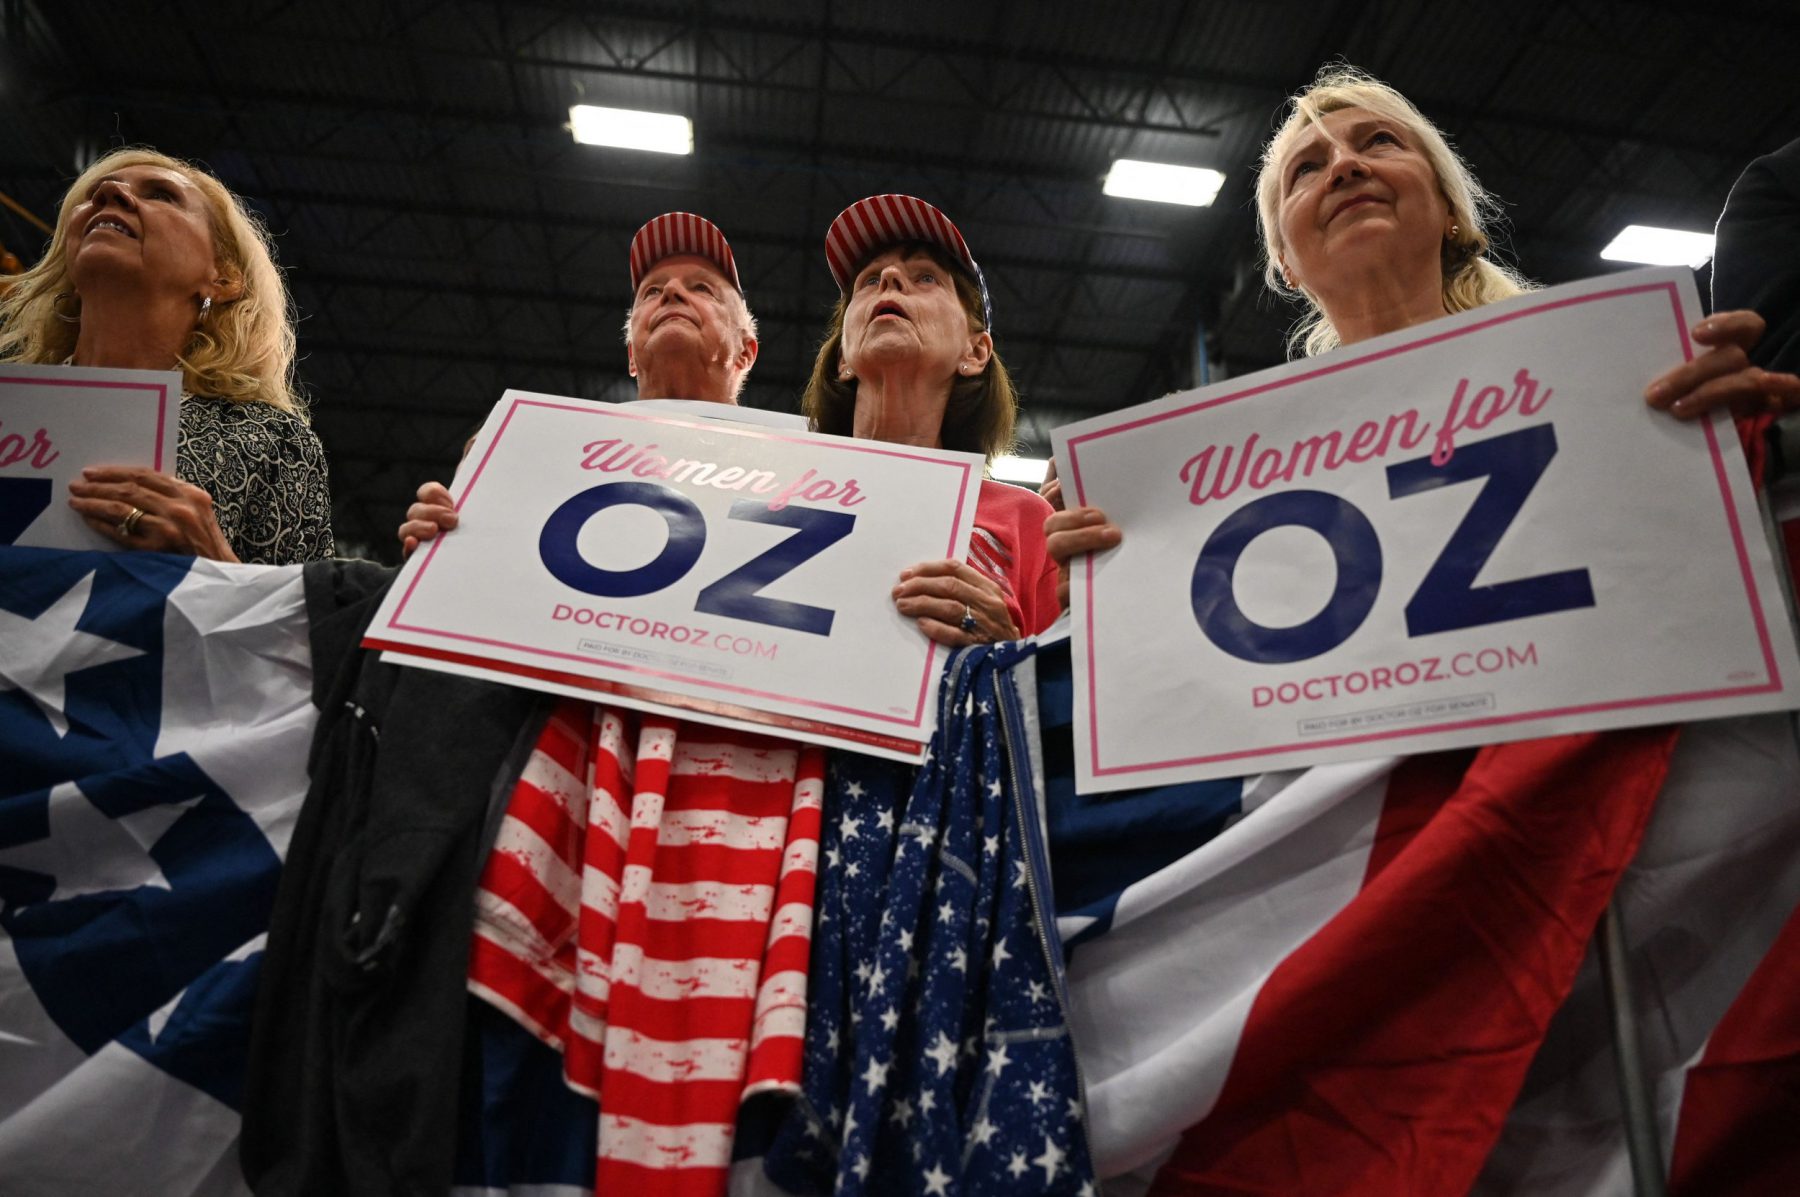 Supporters hold signs reading "Women for Oz" as they listen as US candidate for senate Mehmet Oz speaks during a rally on the outskirts of Bethlehem, Pennsylvania on November 6, 2022. (Photo by Ed JONES / AFP) (Photo by ED JONES/AFP via Getty Images)